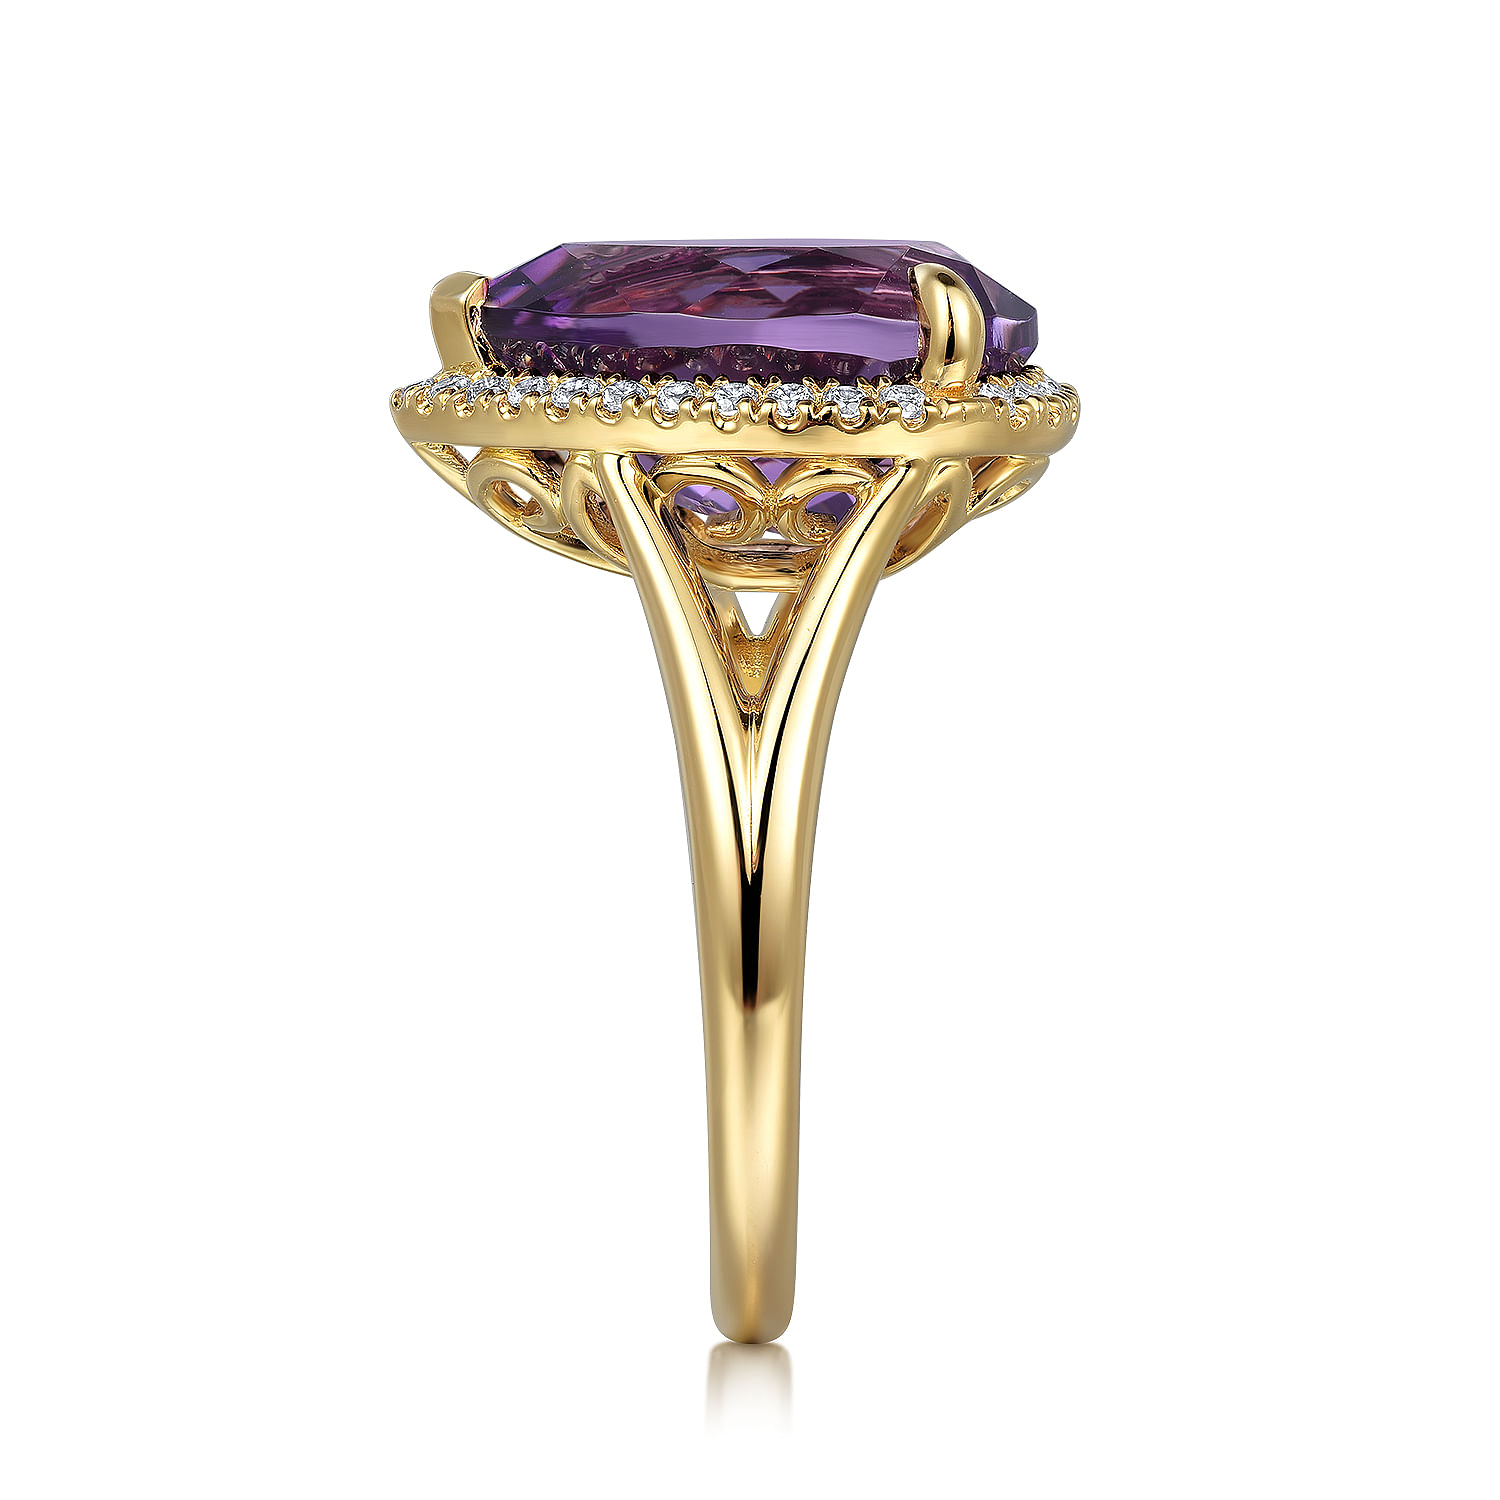 14K Yellow Gold Diamond and Flat Pear Shape Amethyst Ladies Ring With Flower Pattern Gallery